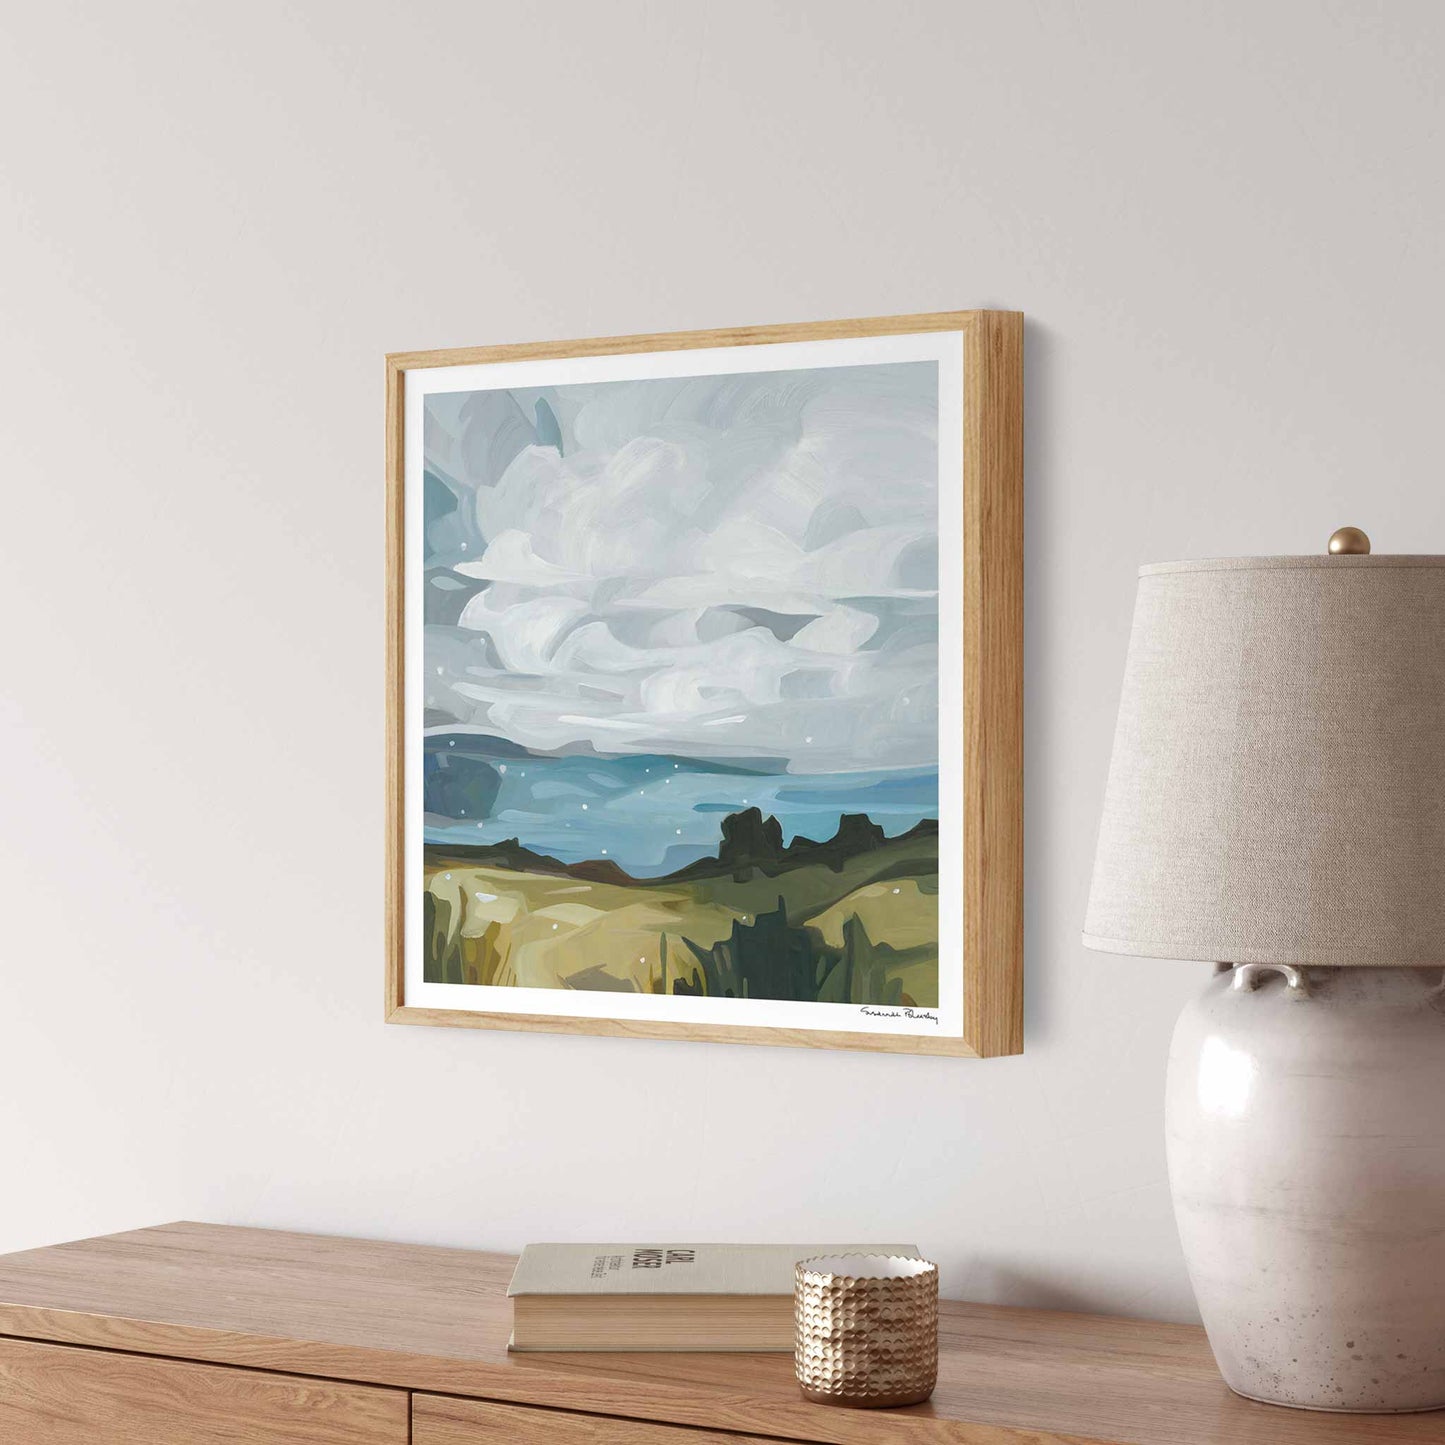 square art print of an abstract landscape with snowflakes by Canadian artist Susannah Bleasby